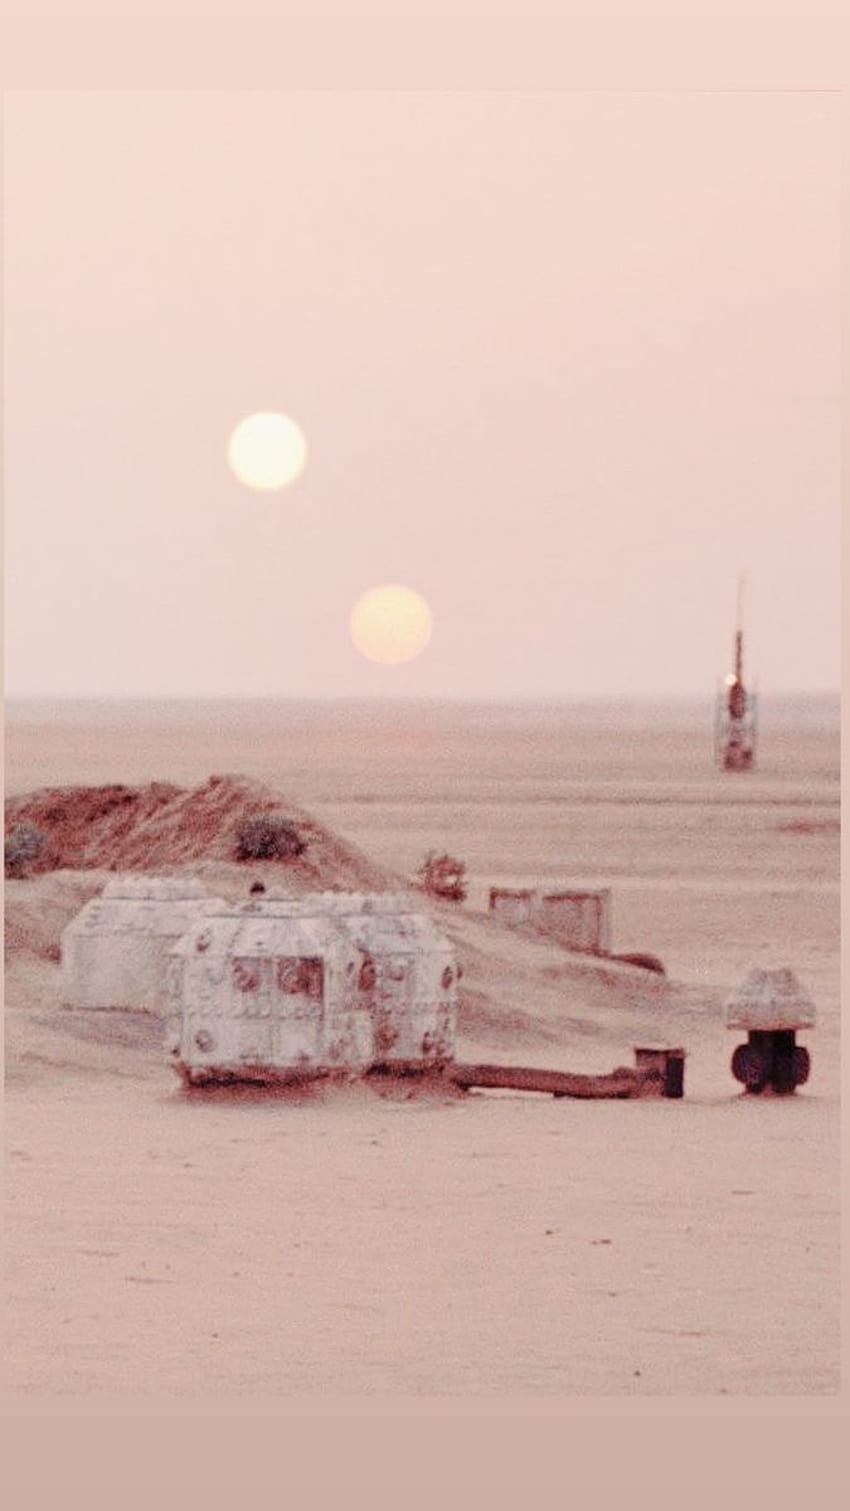 A desert scene with a double sunset and a small building in the foreground. - Star Wars